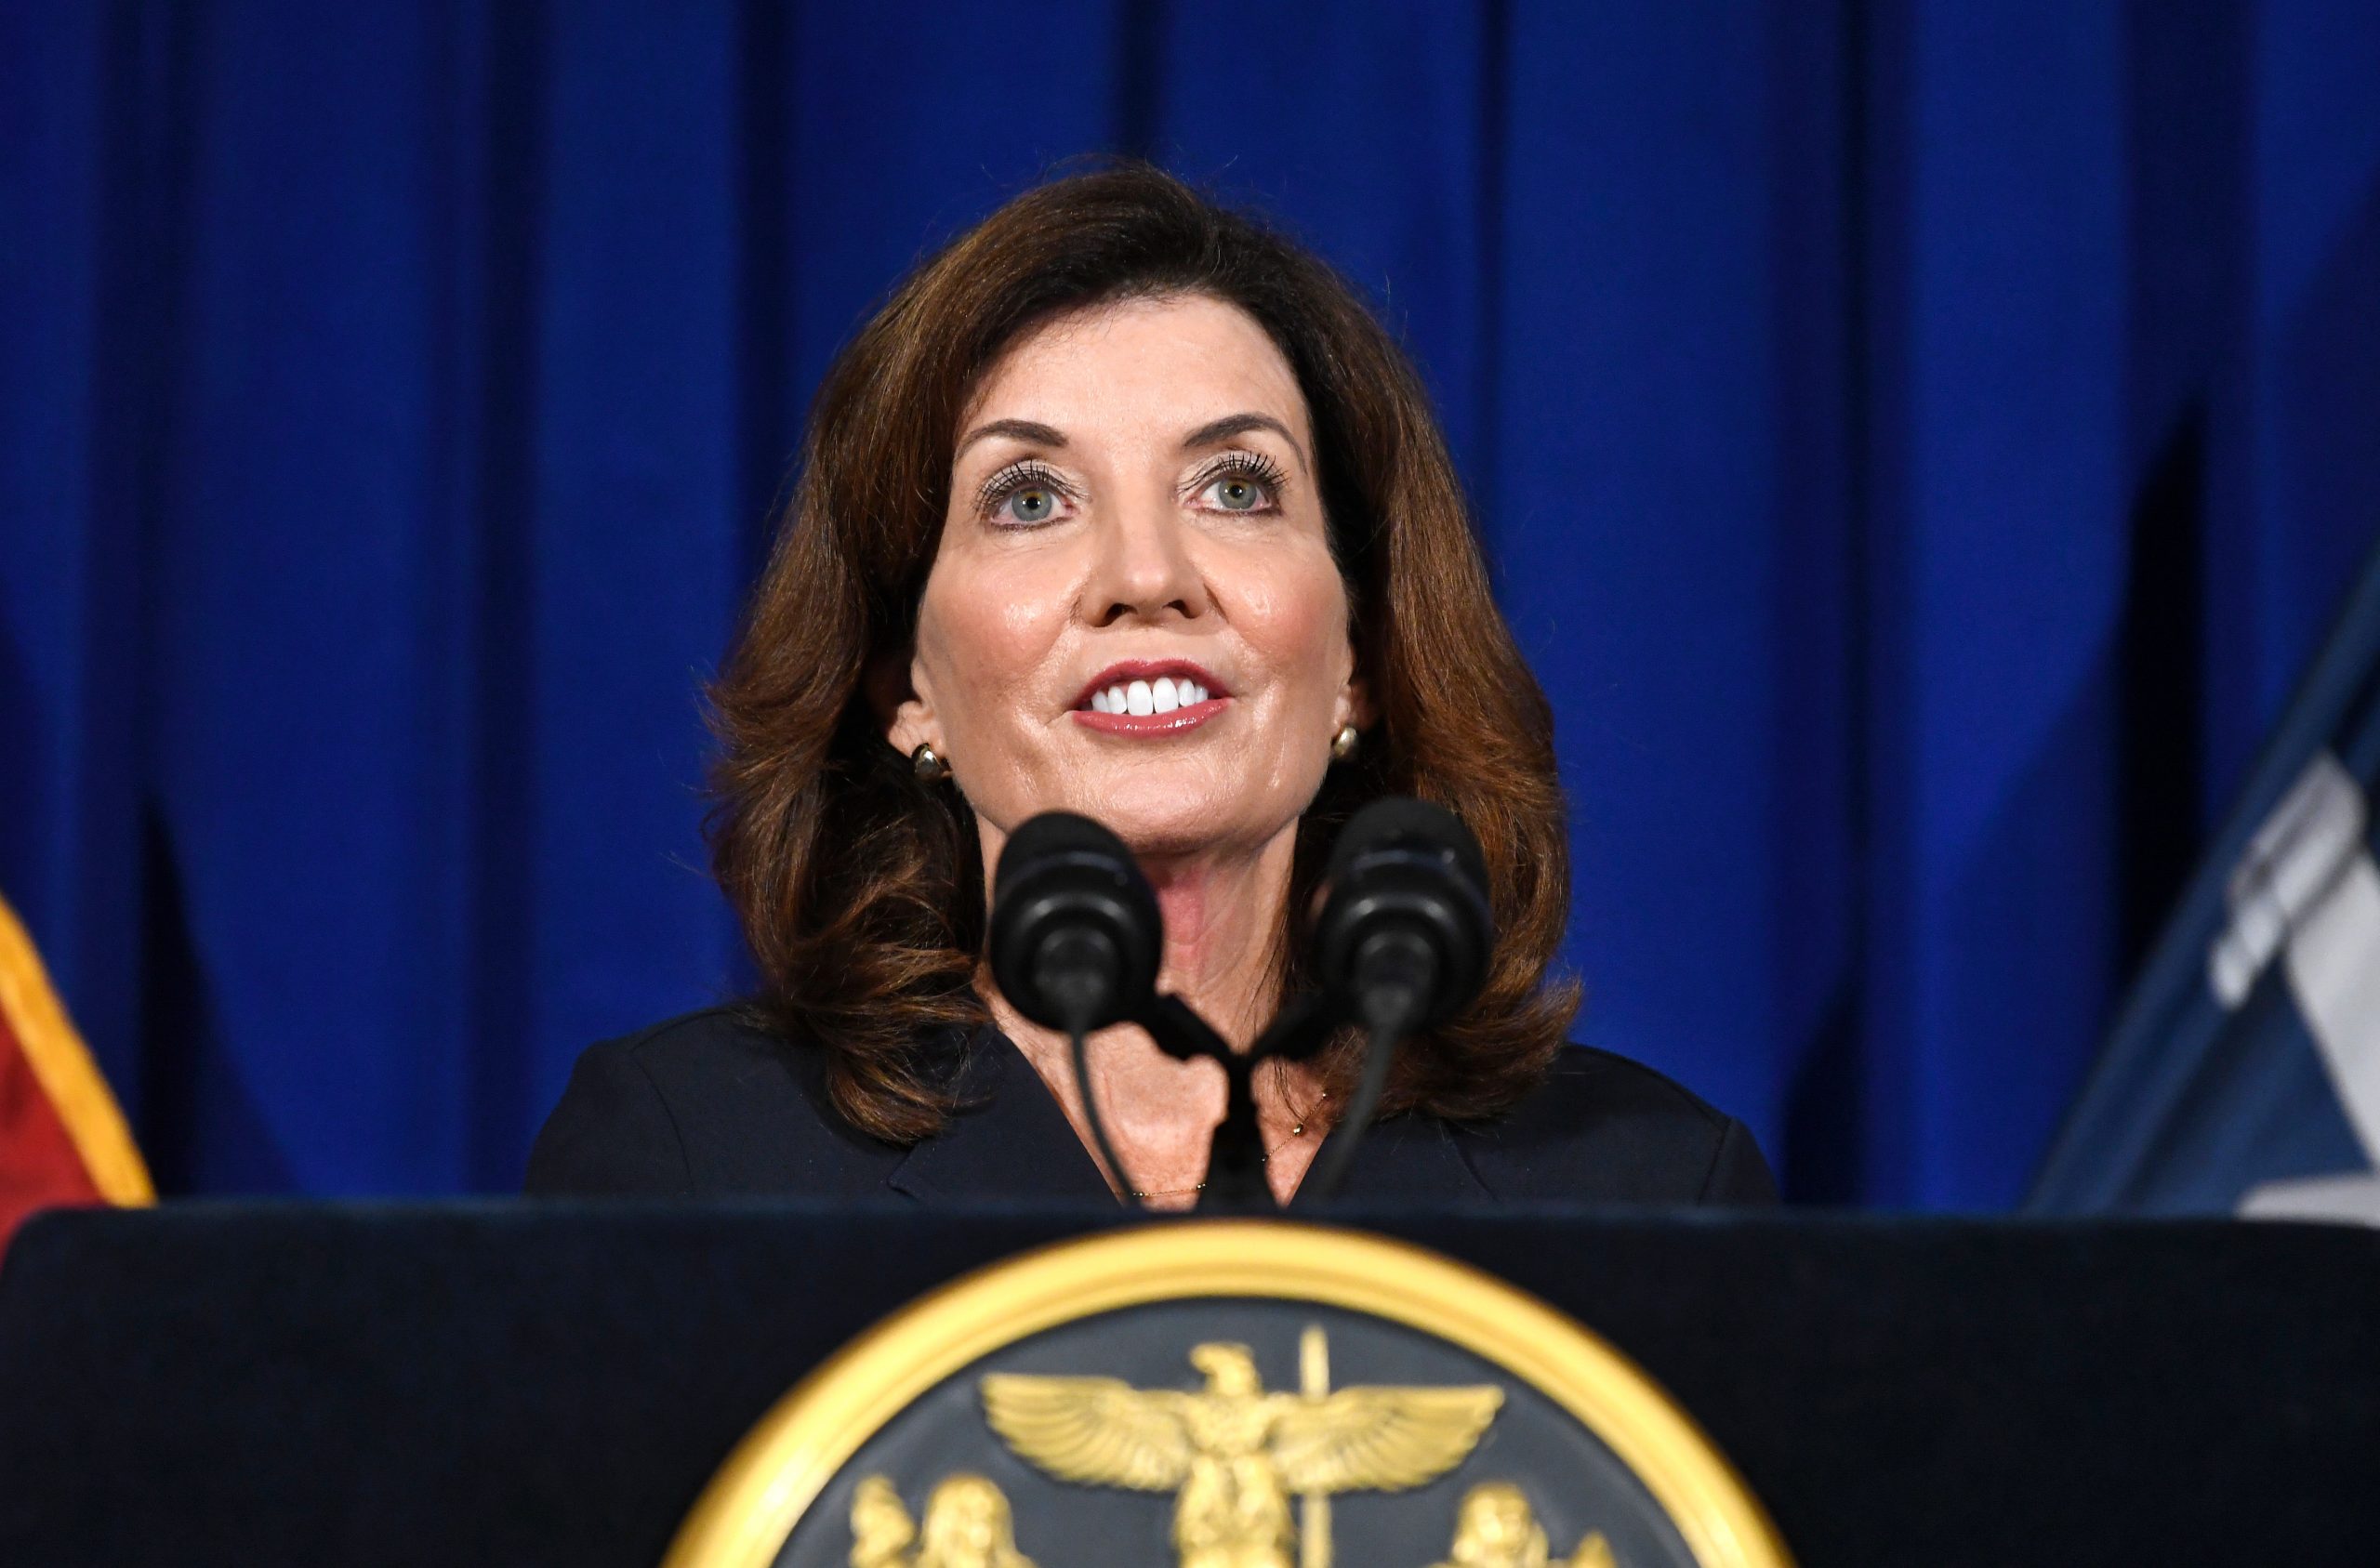 Kathy Hochul fortifies frontrunner status in New York governor’s race